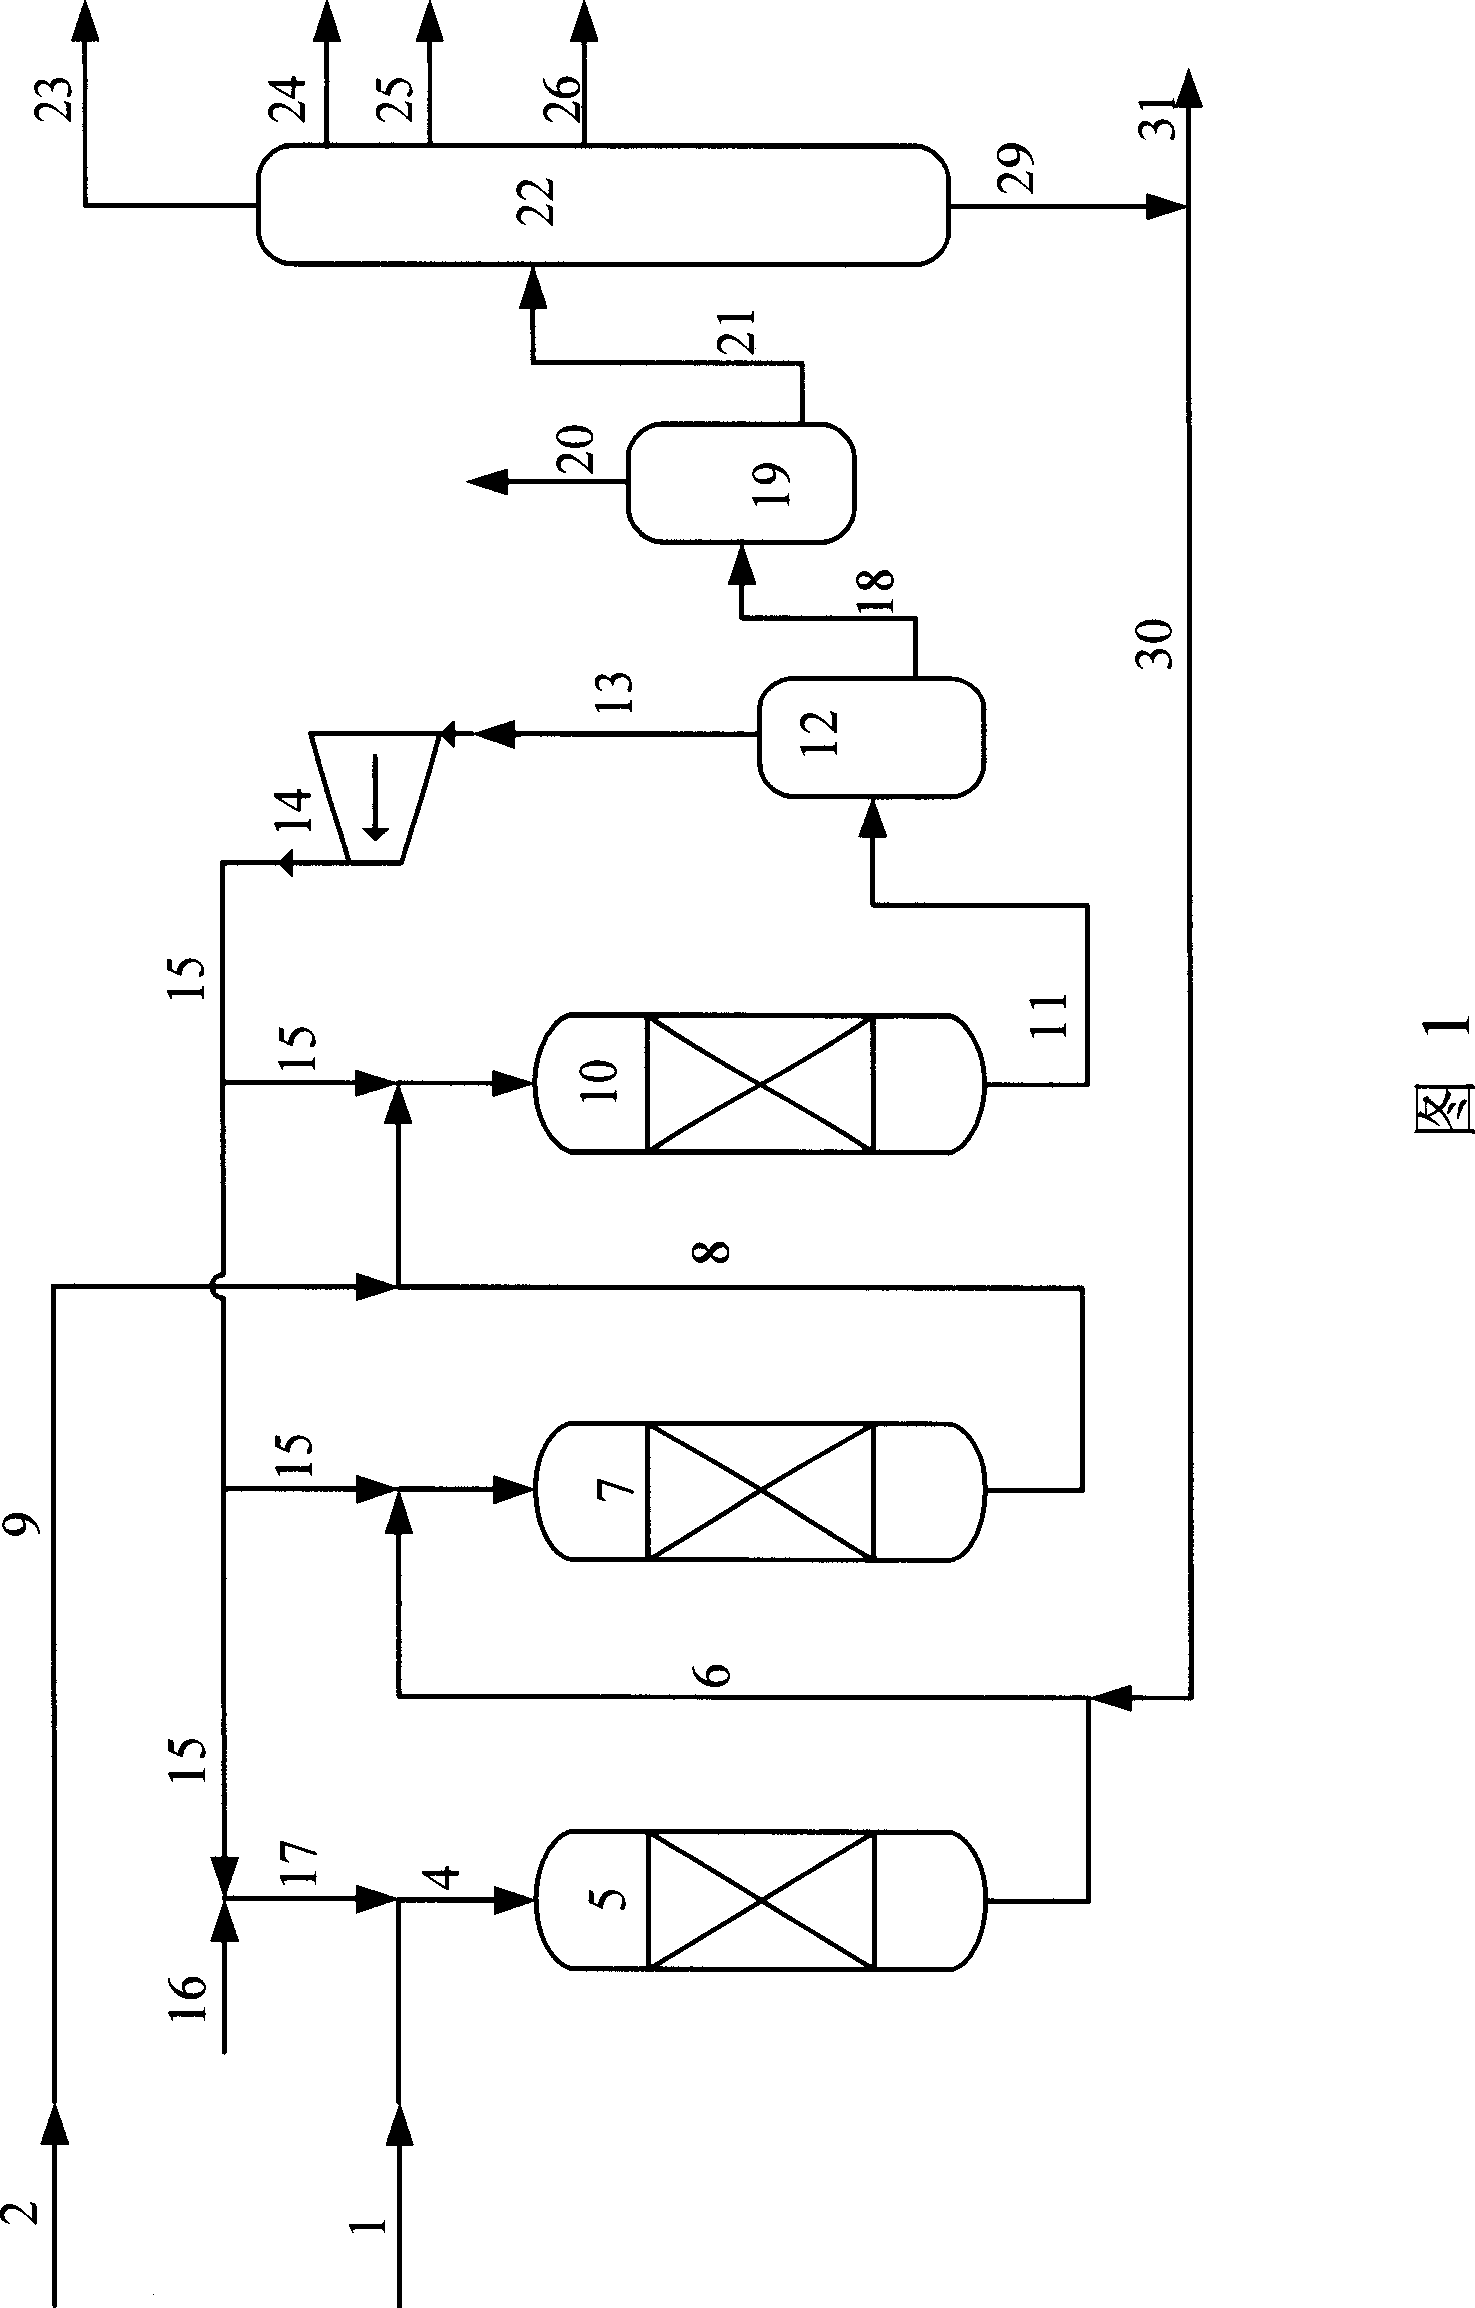 Hydrogenation method capable of producing diesel oil and chemical materials flexibly